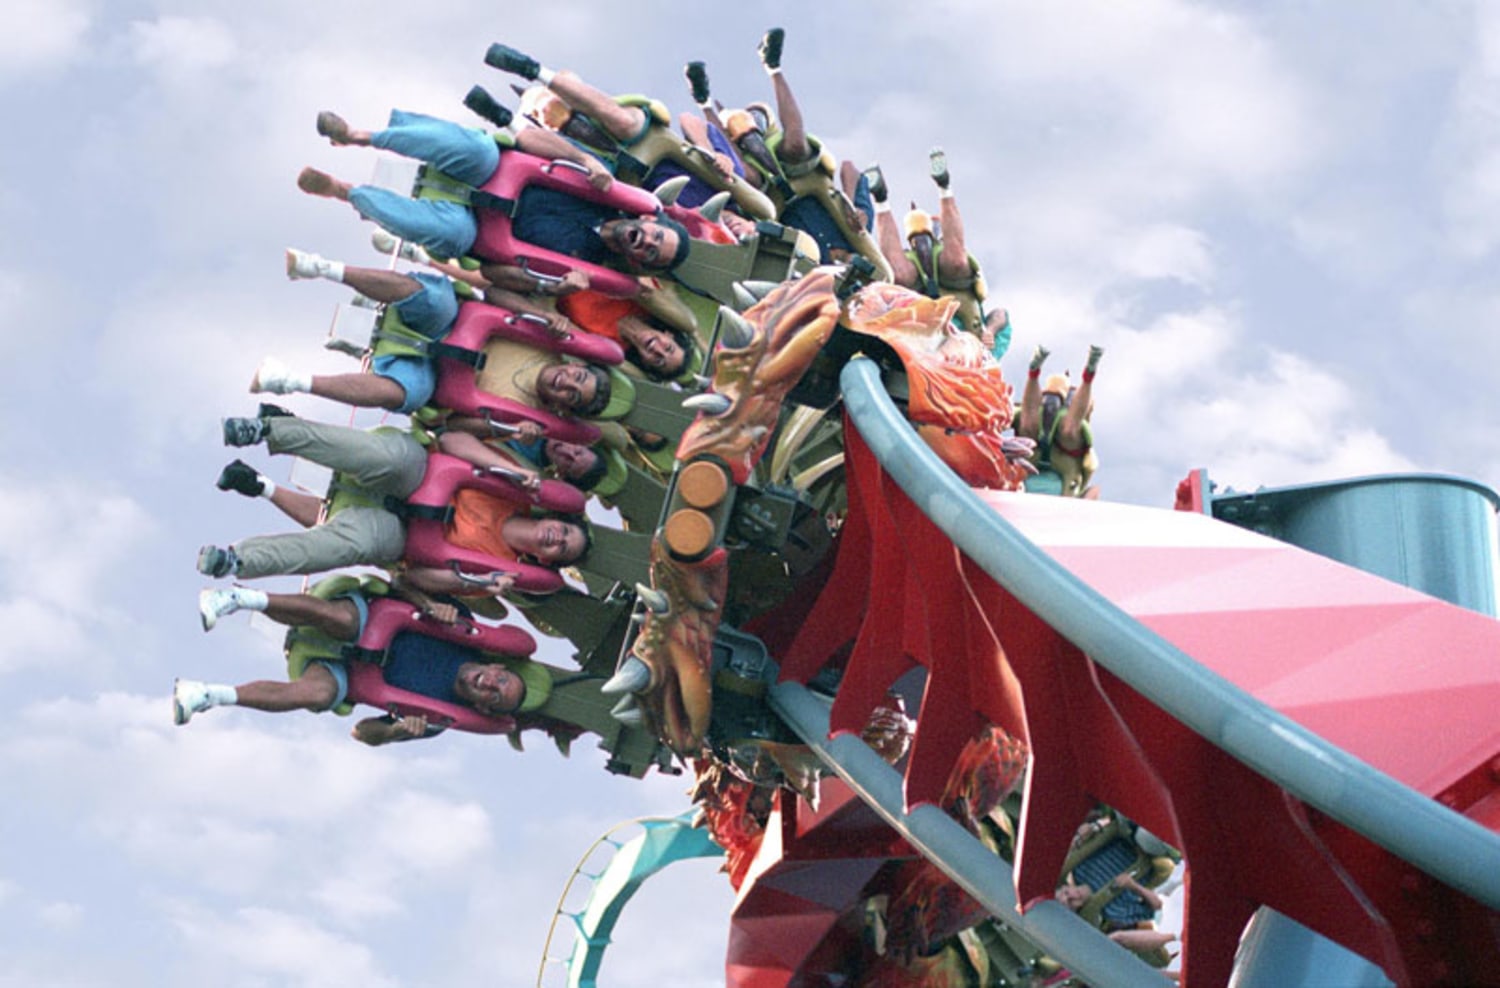 Record-breaking roller coasters